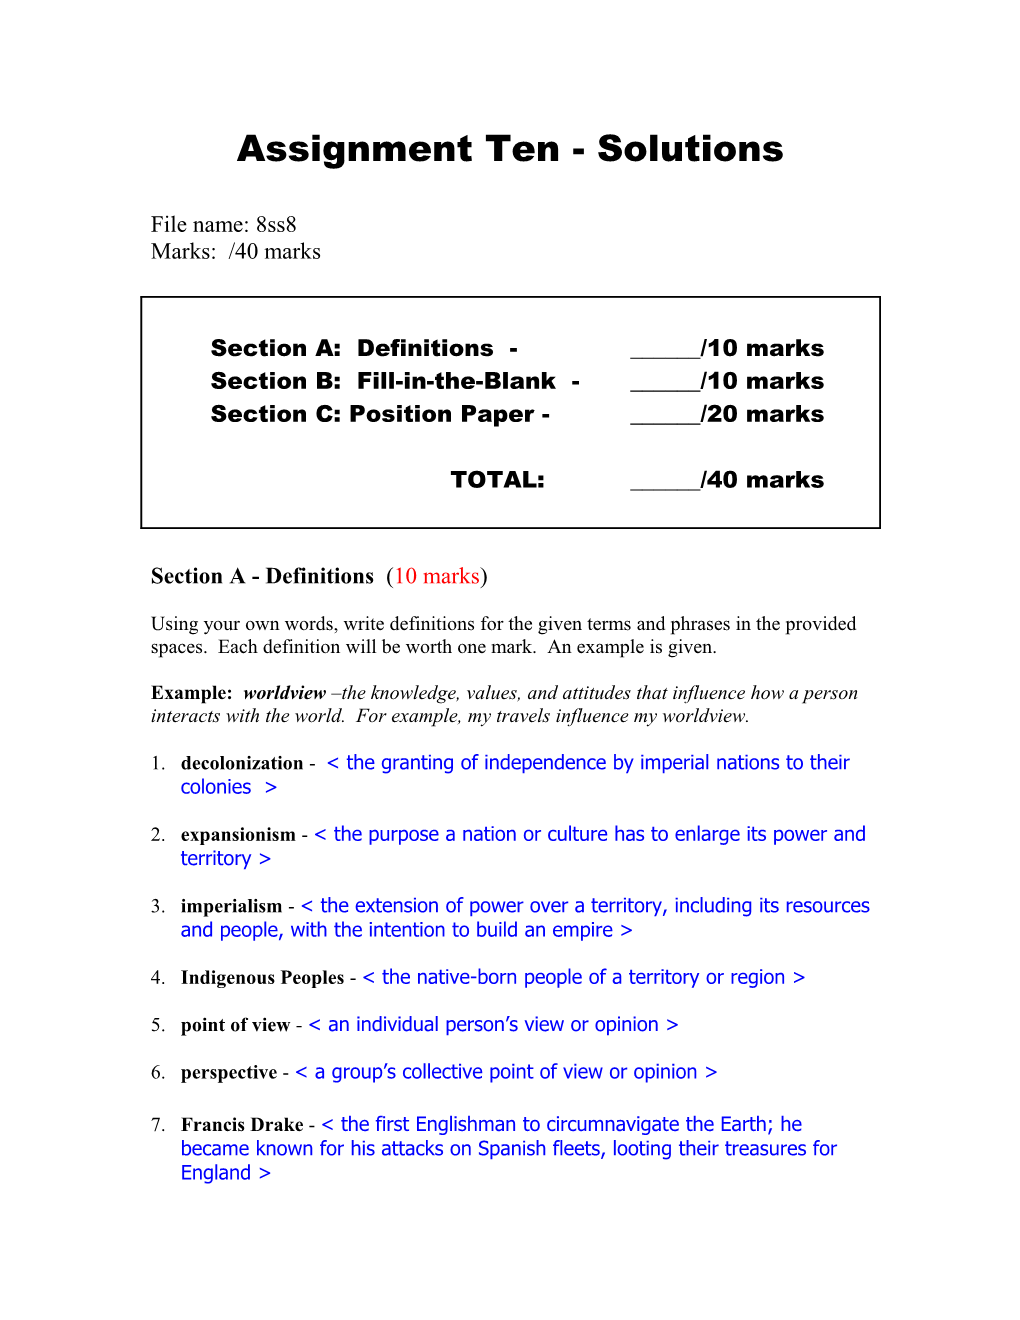 Assignment Eight - Solutions